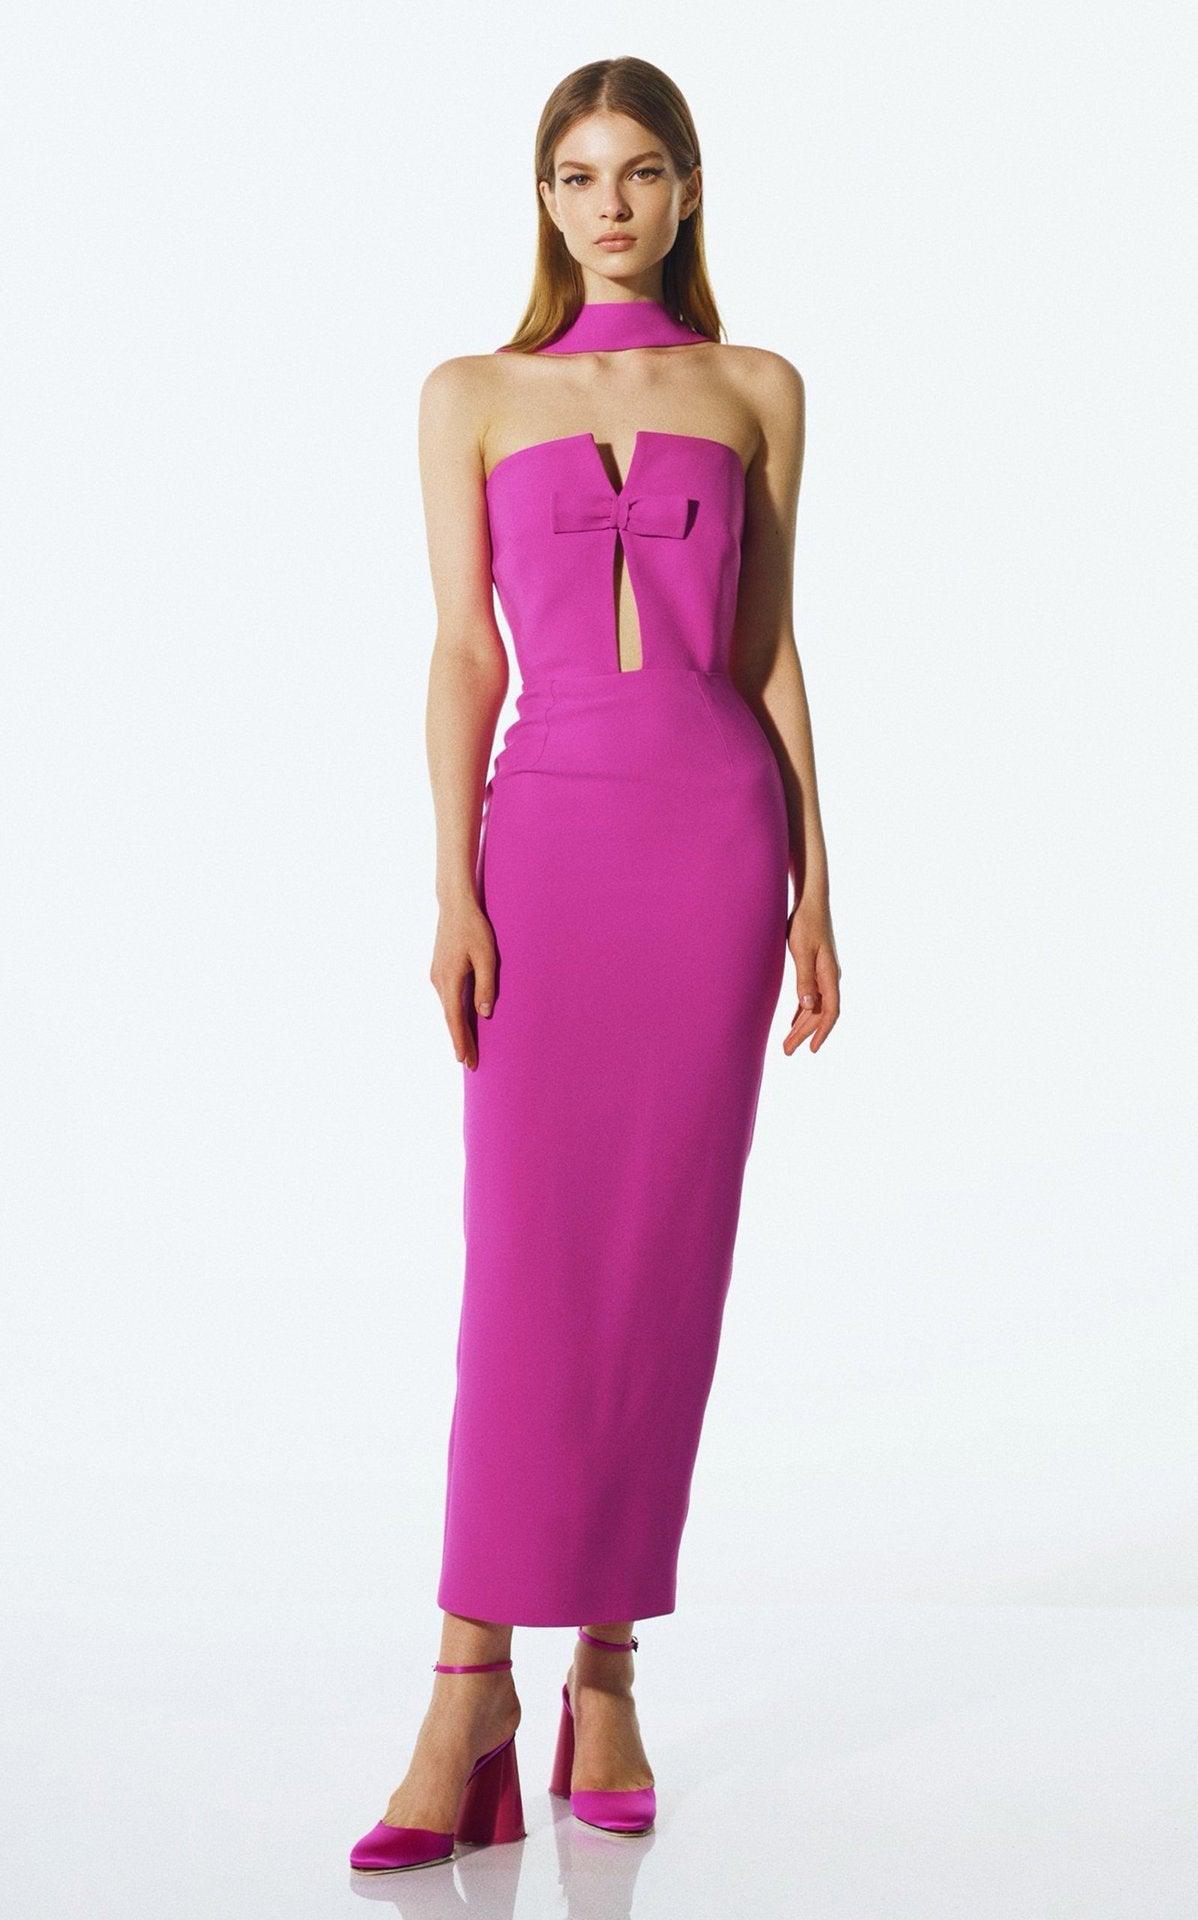 Josefa Bow Dress from The House of CO-KY - Dresses